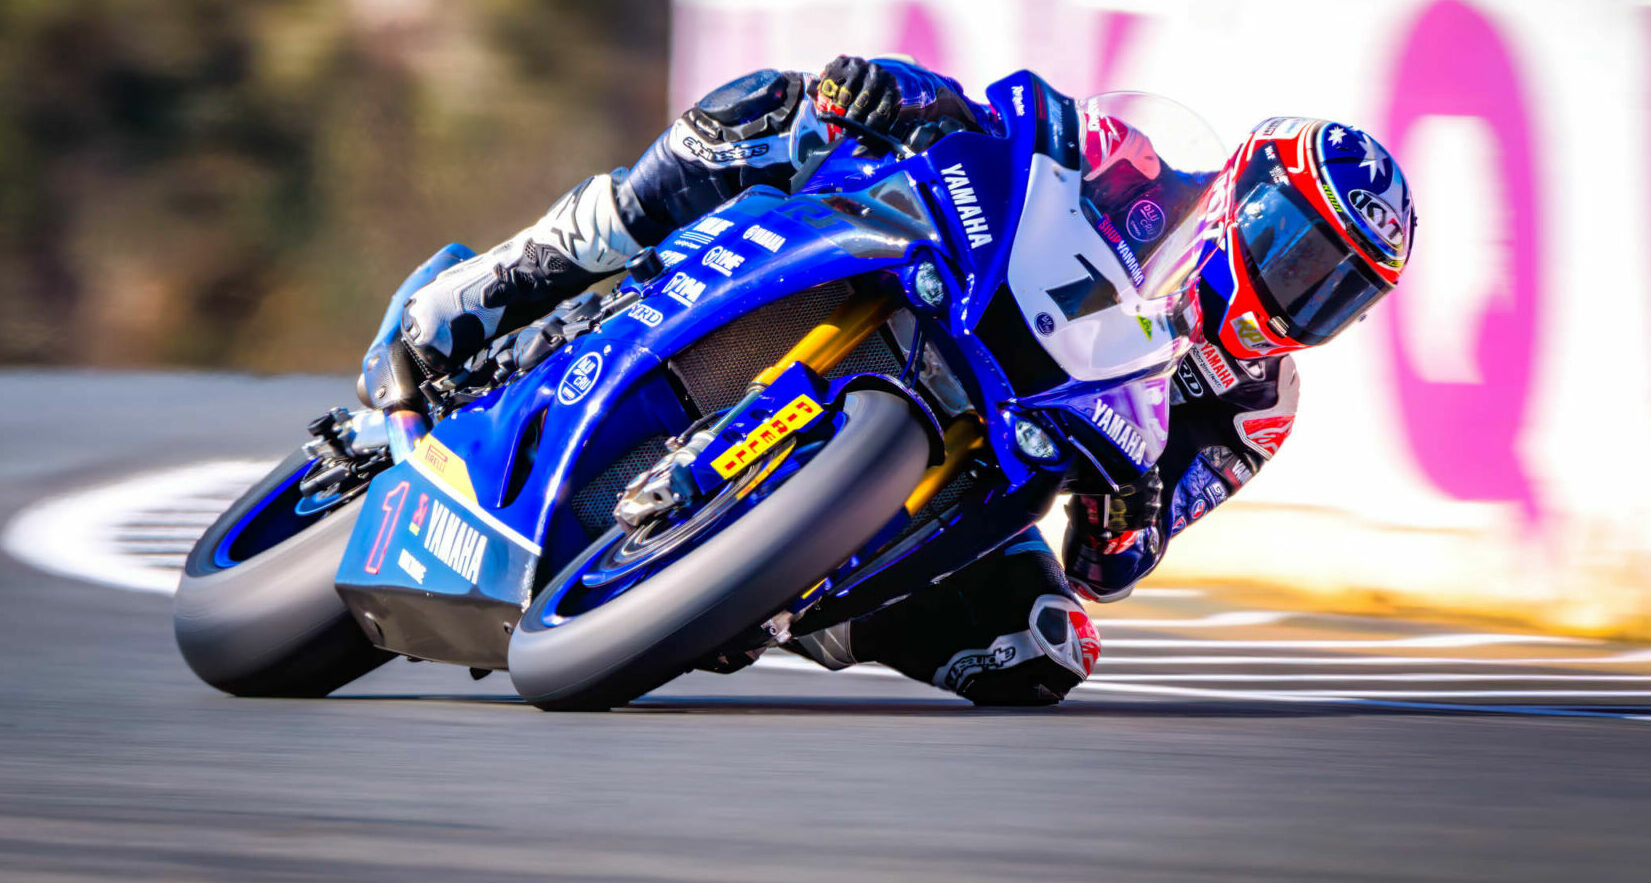 IV. Requirements for Motorcycle Insurance at Track Days